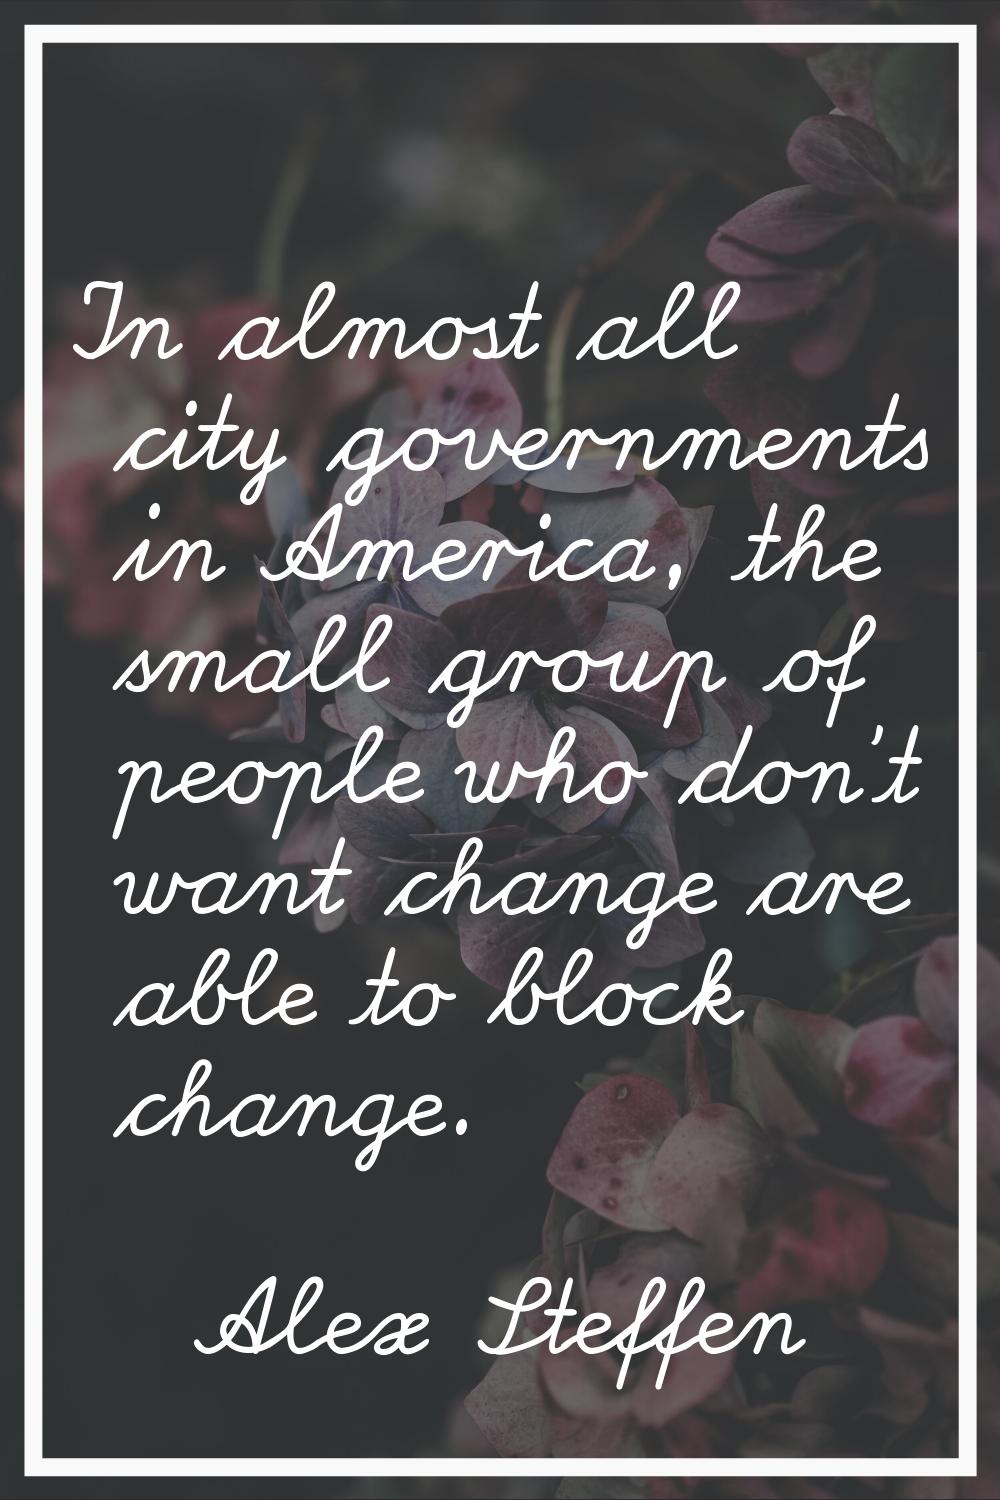 In almost all city governments in America, the small group of people who don't want change are able